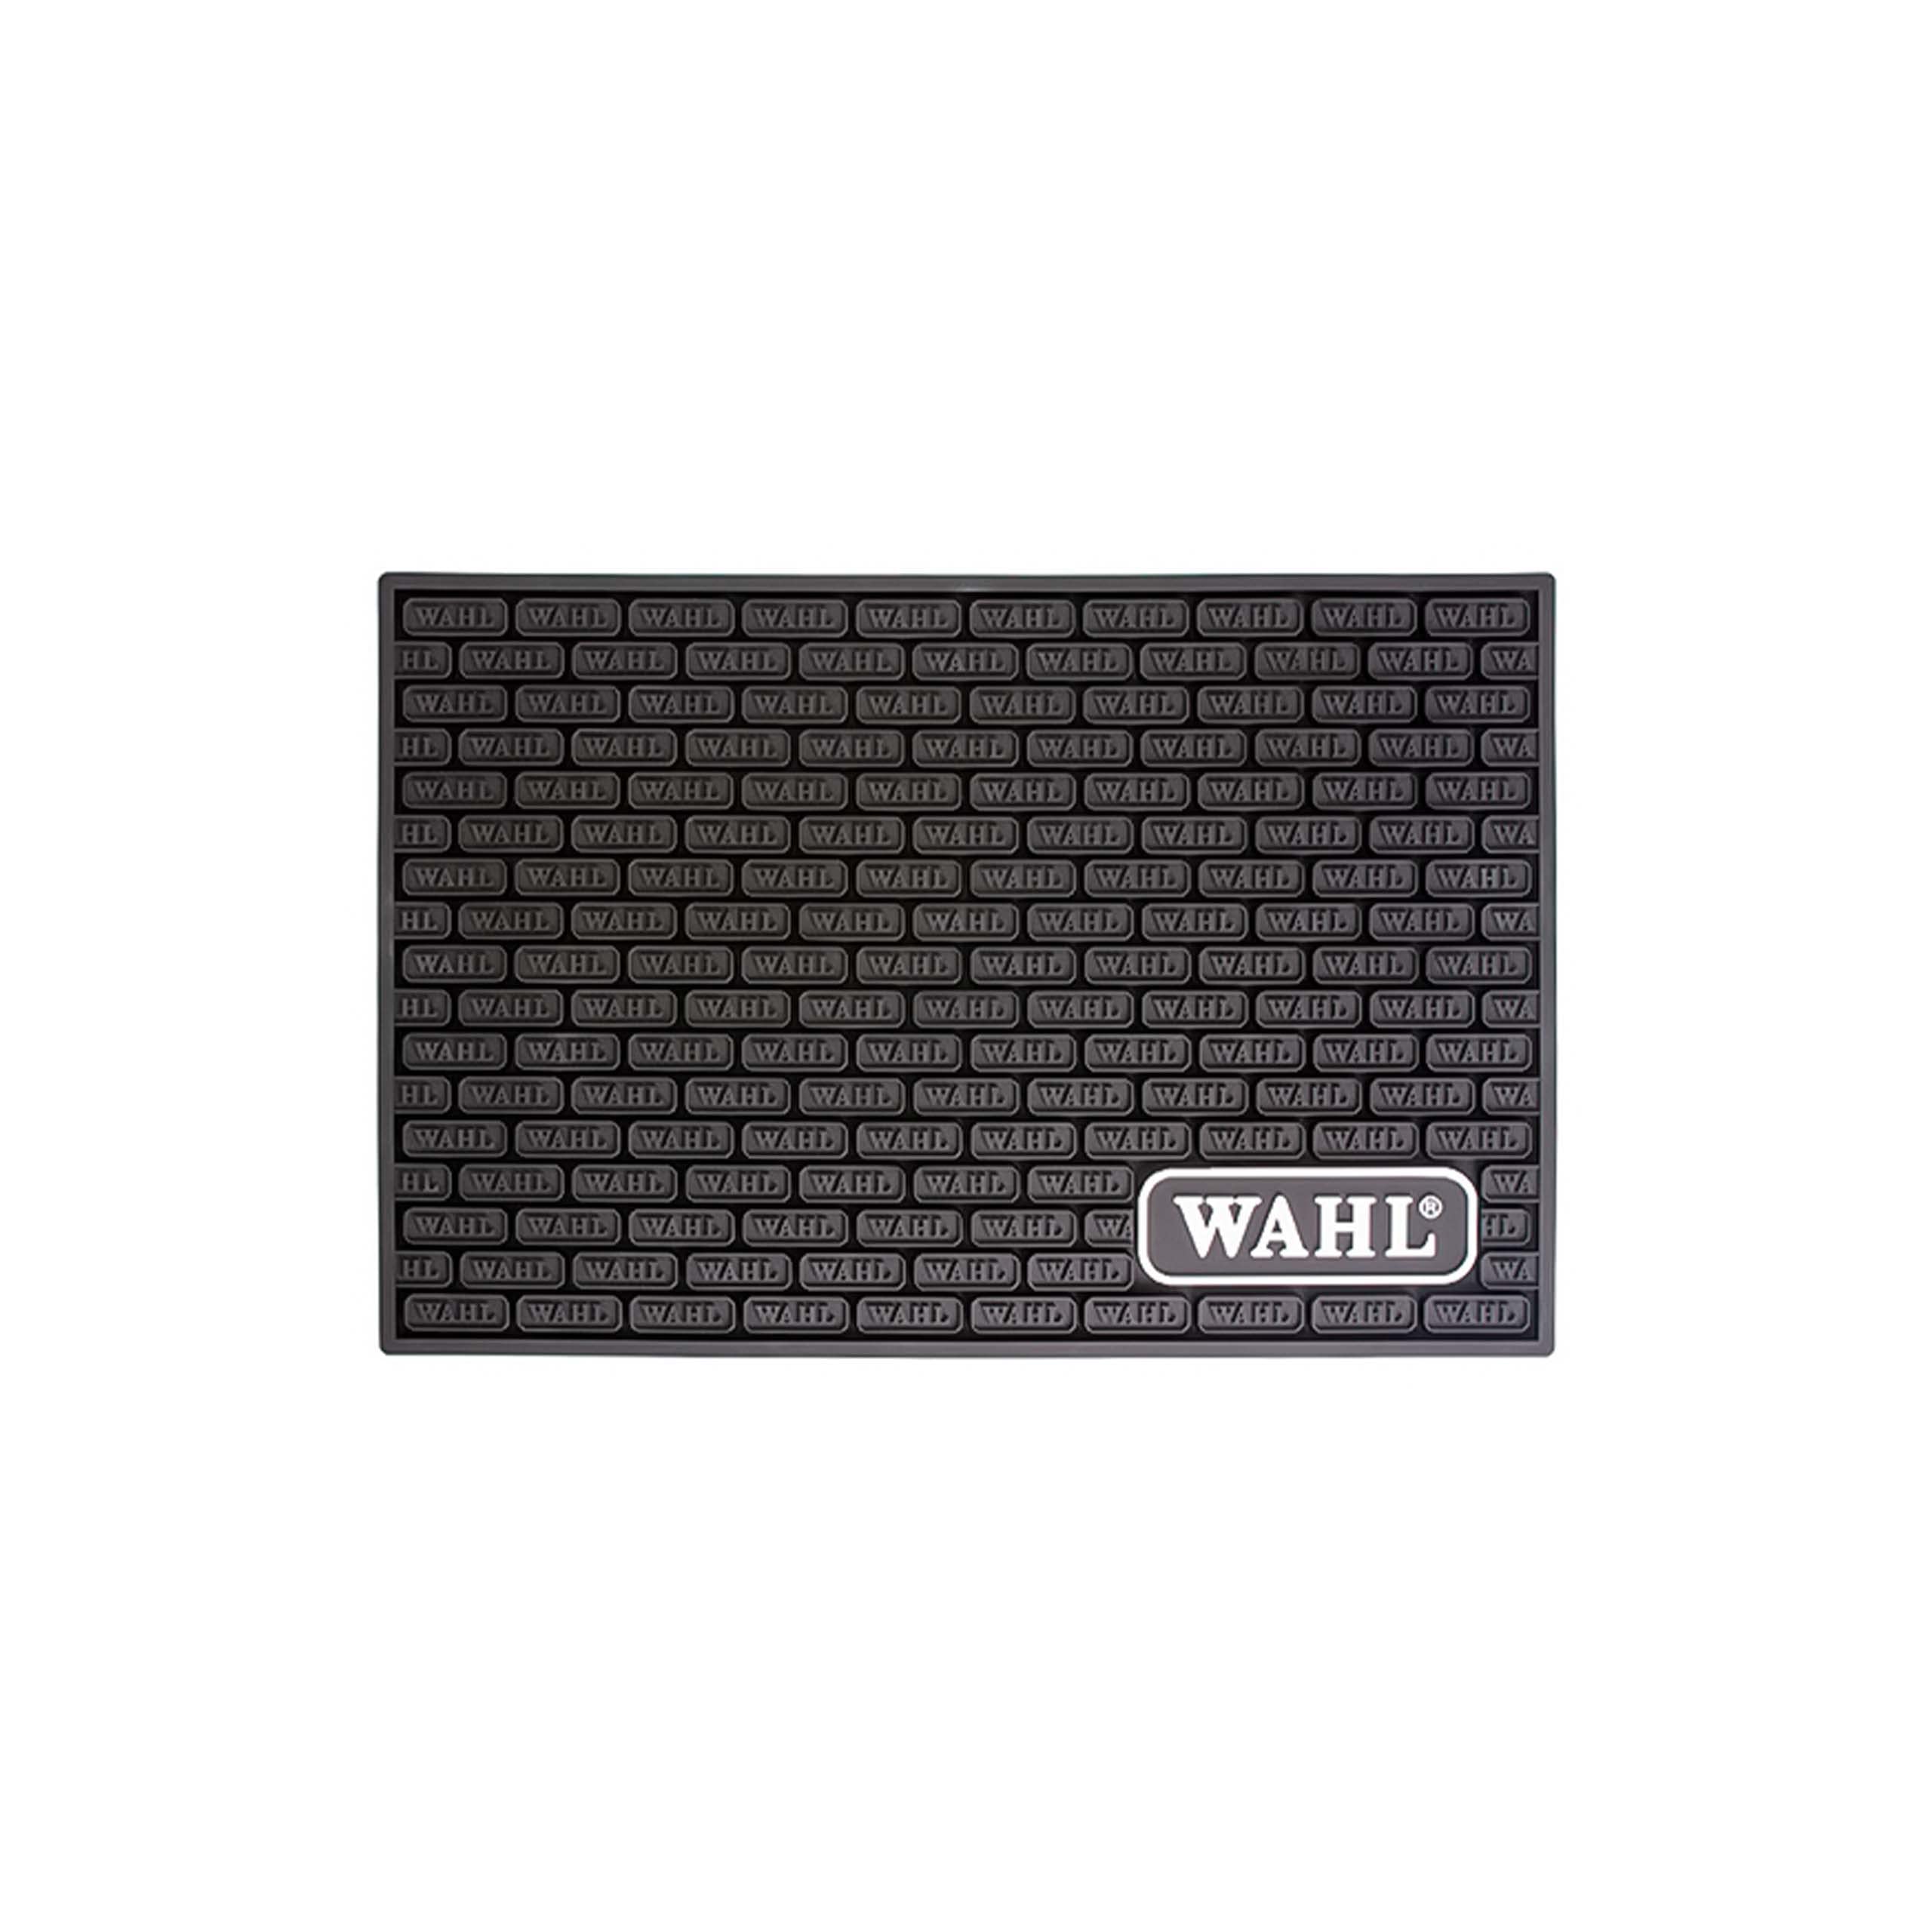 Wahl Professional Detailer Trimmer & Wahl Professional Tool Mat for Clippers, Trimmers & Haircut Tools Bundle